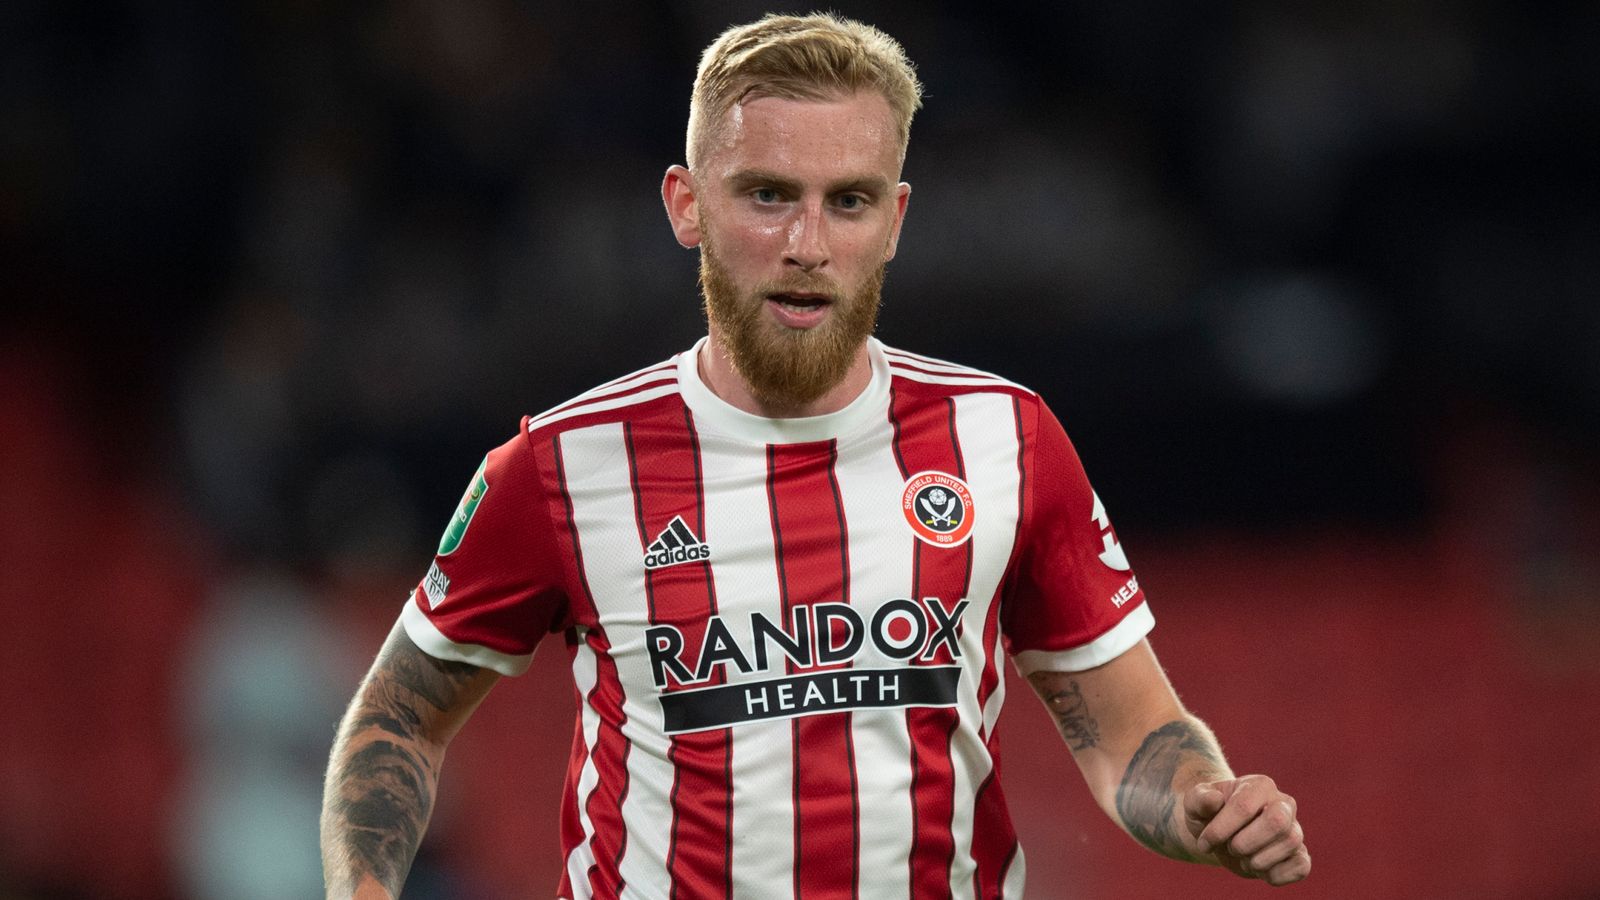 Sheff Utd's Oli McBurnie appears to kick fan during pitch invasion at Nottingham..